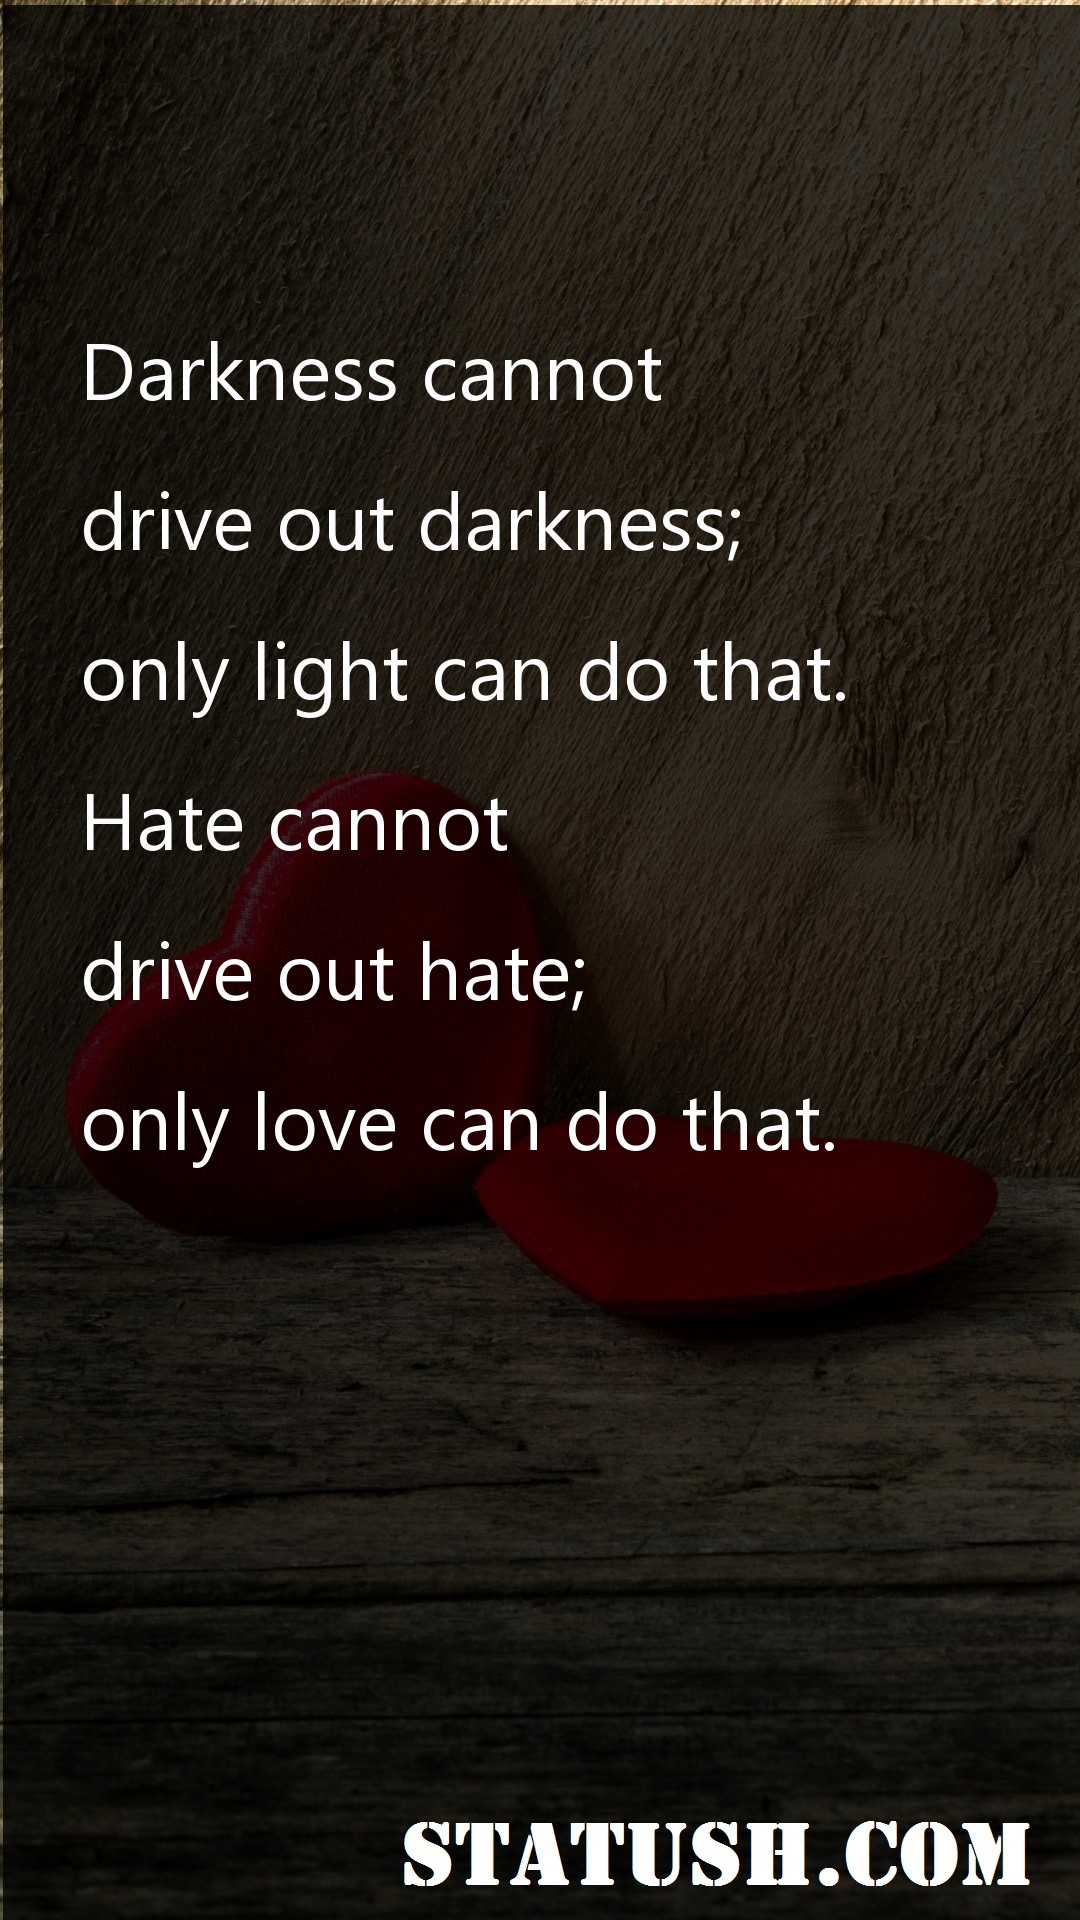 Darkness cannot drive out darkness - Love Quotes at statush.com